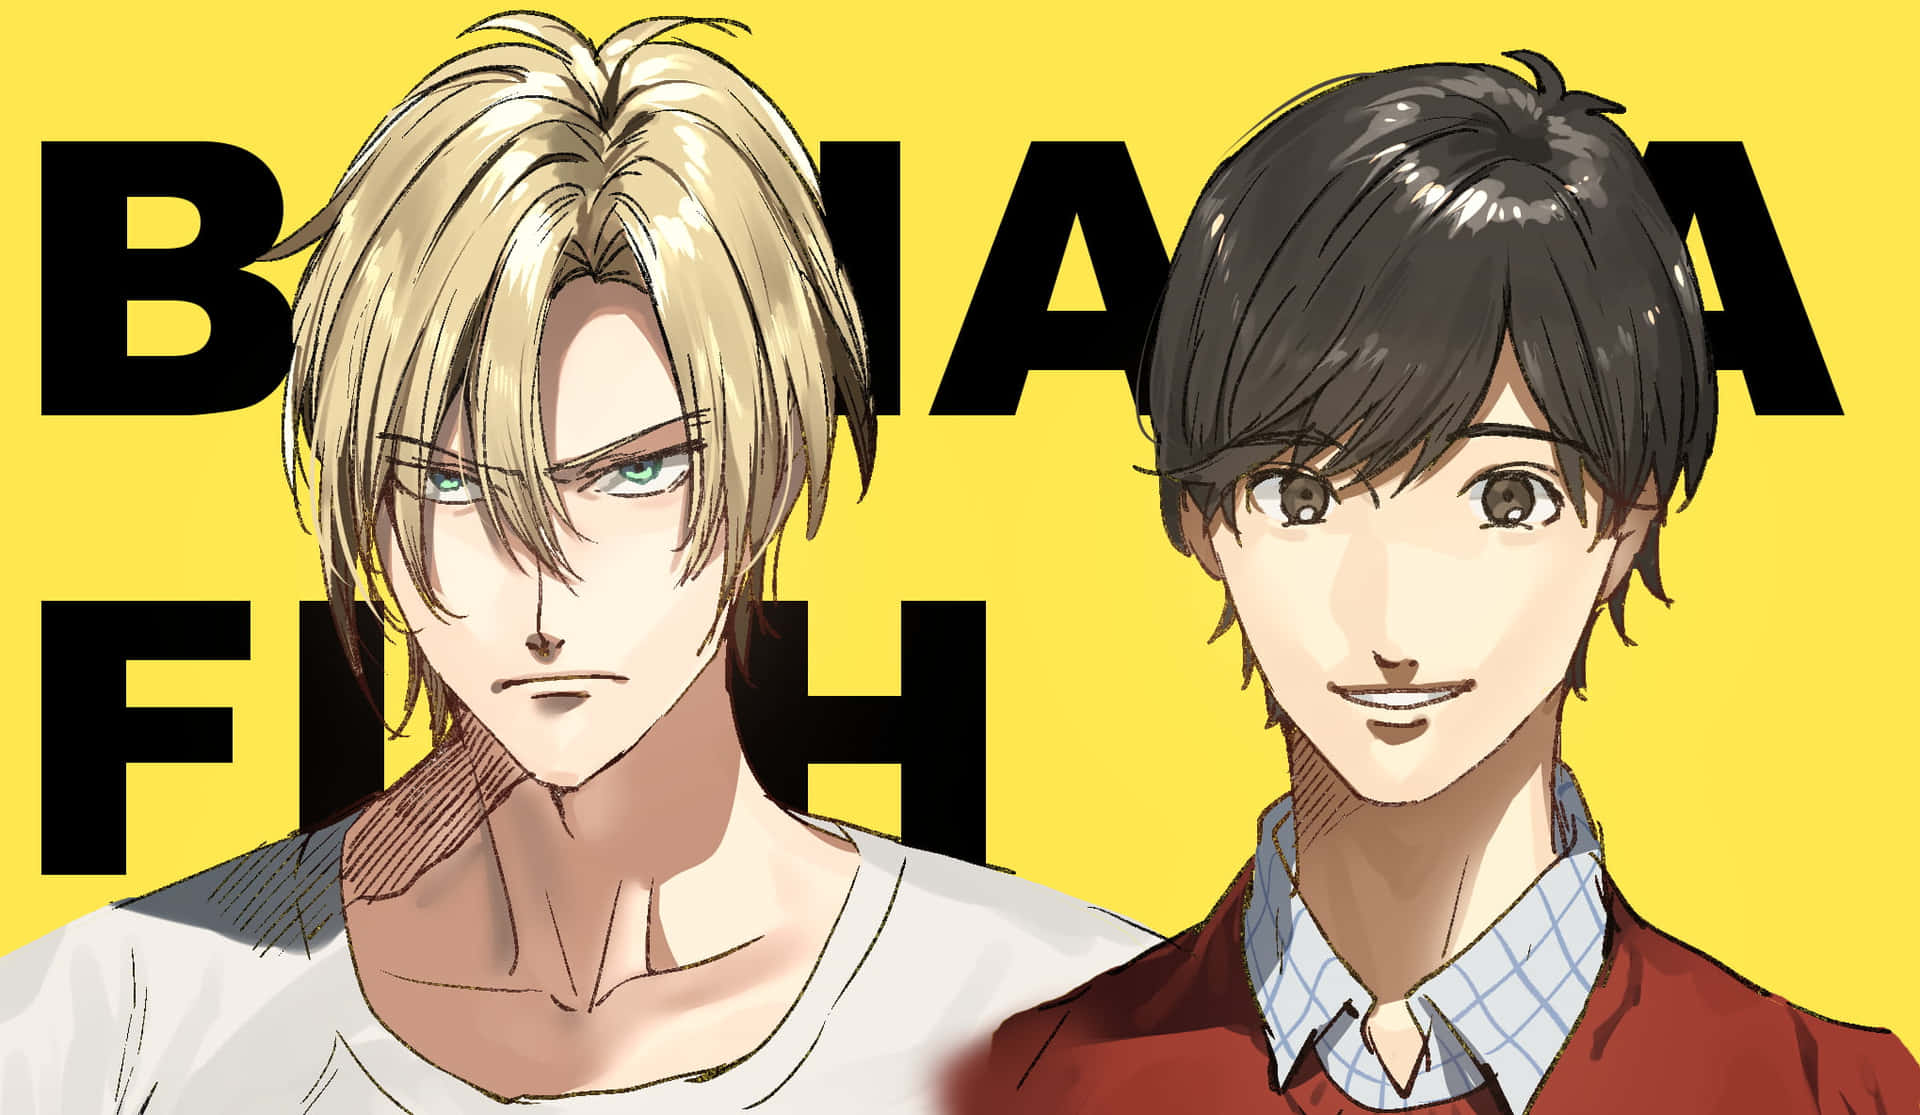 Download The cast of Banana Fish, a popular anime series on the rise.